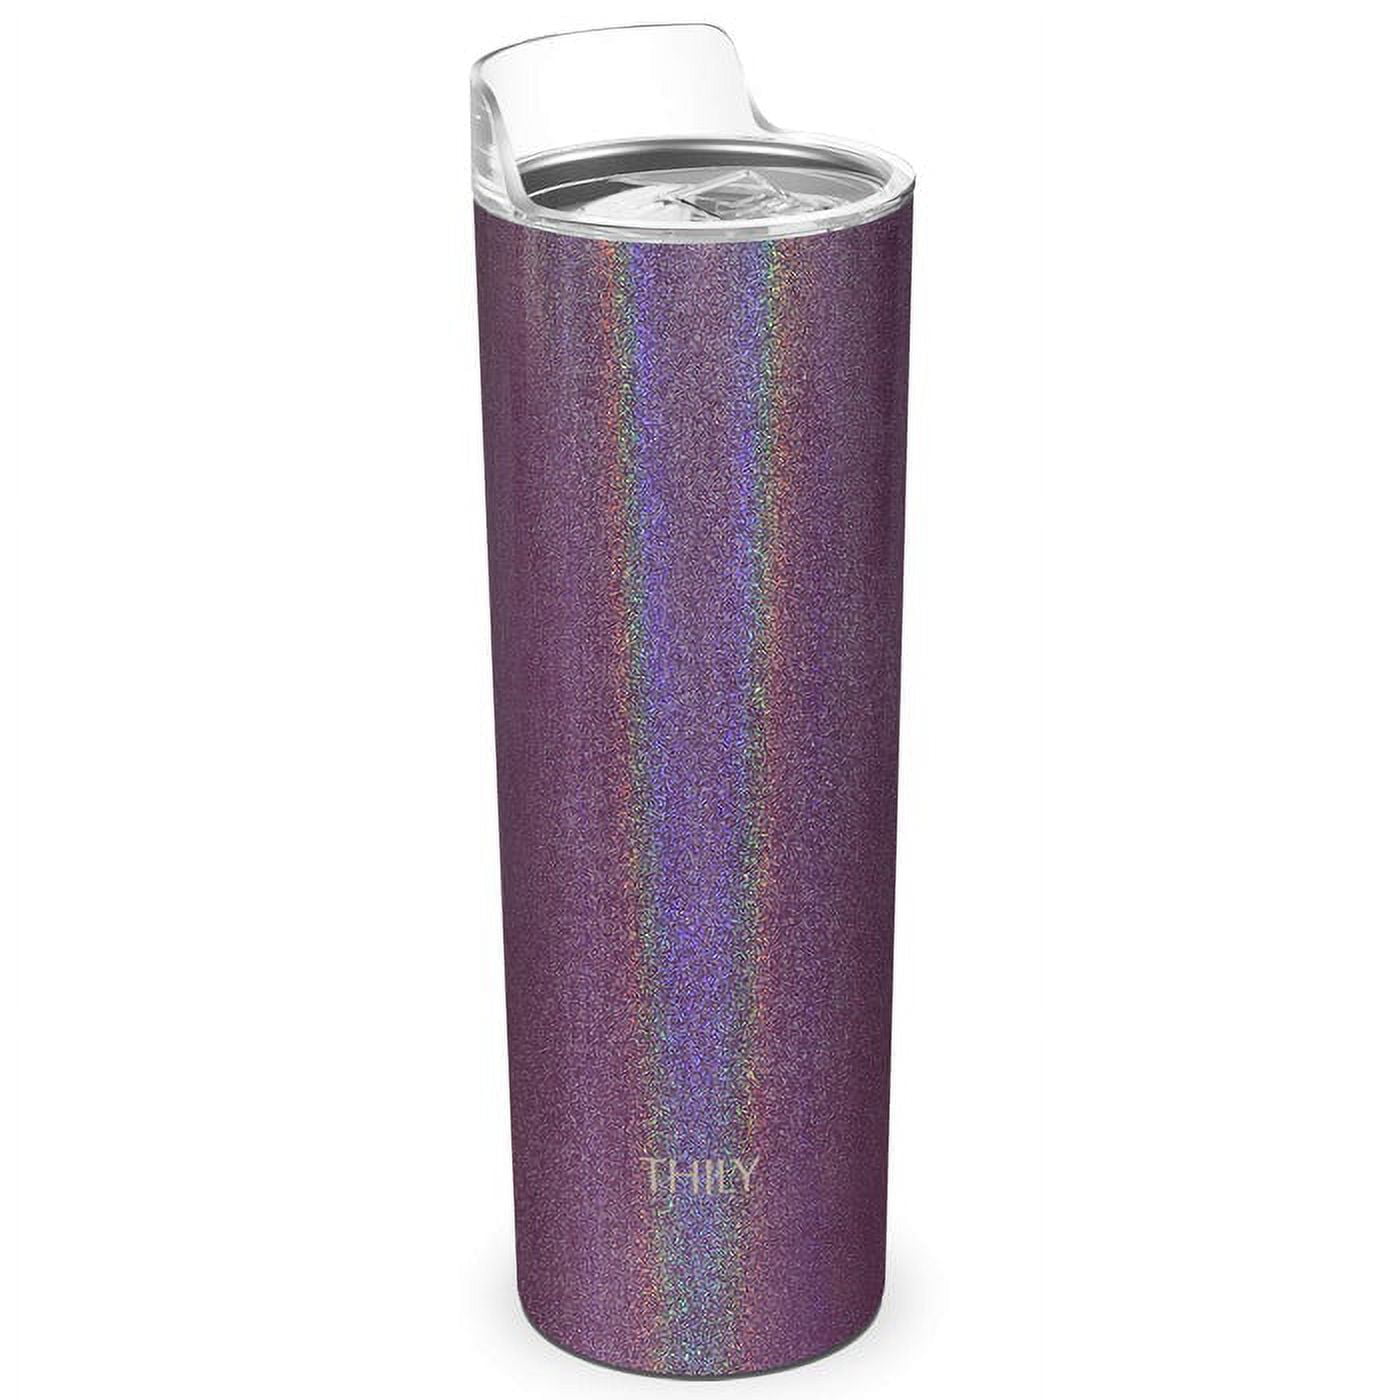 16 oz purple journey travel cup with lid and straw [3340049